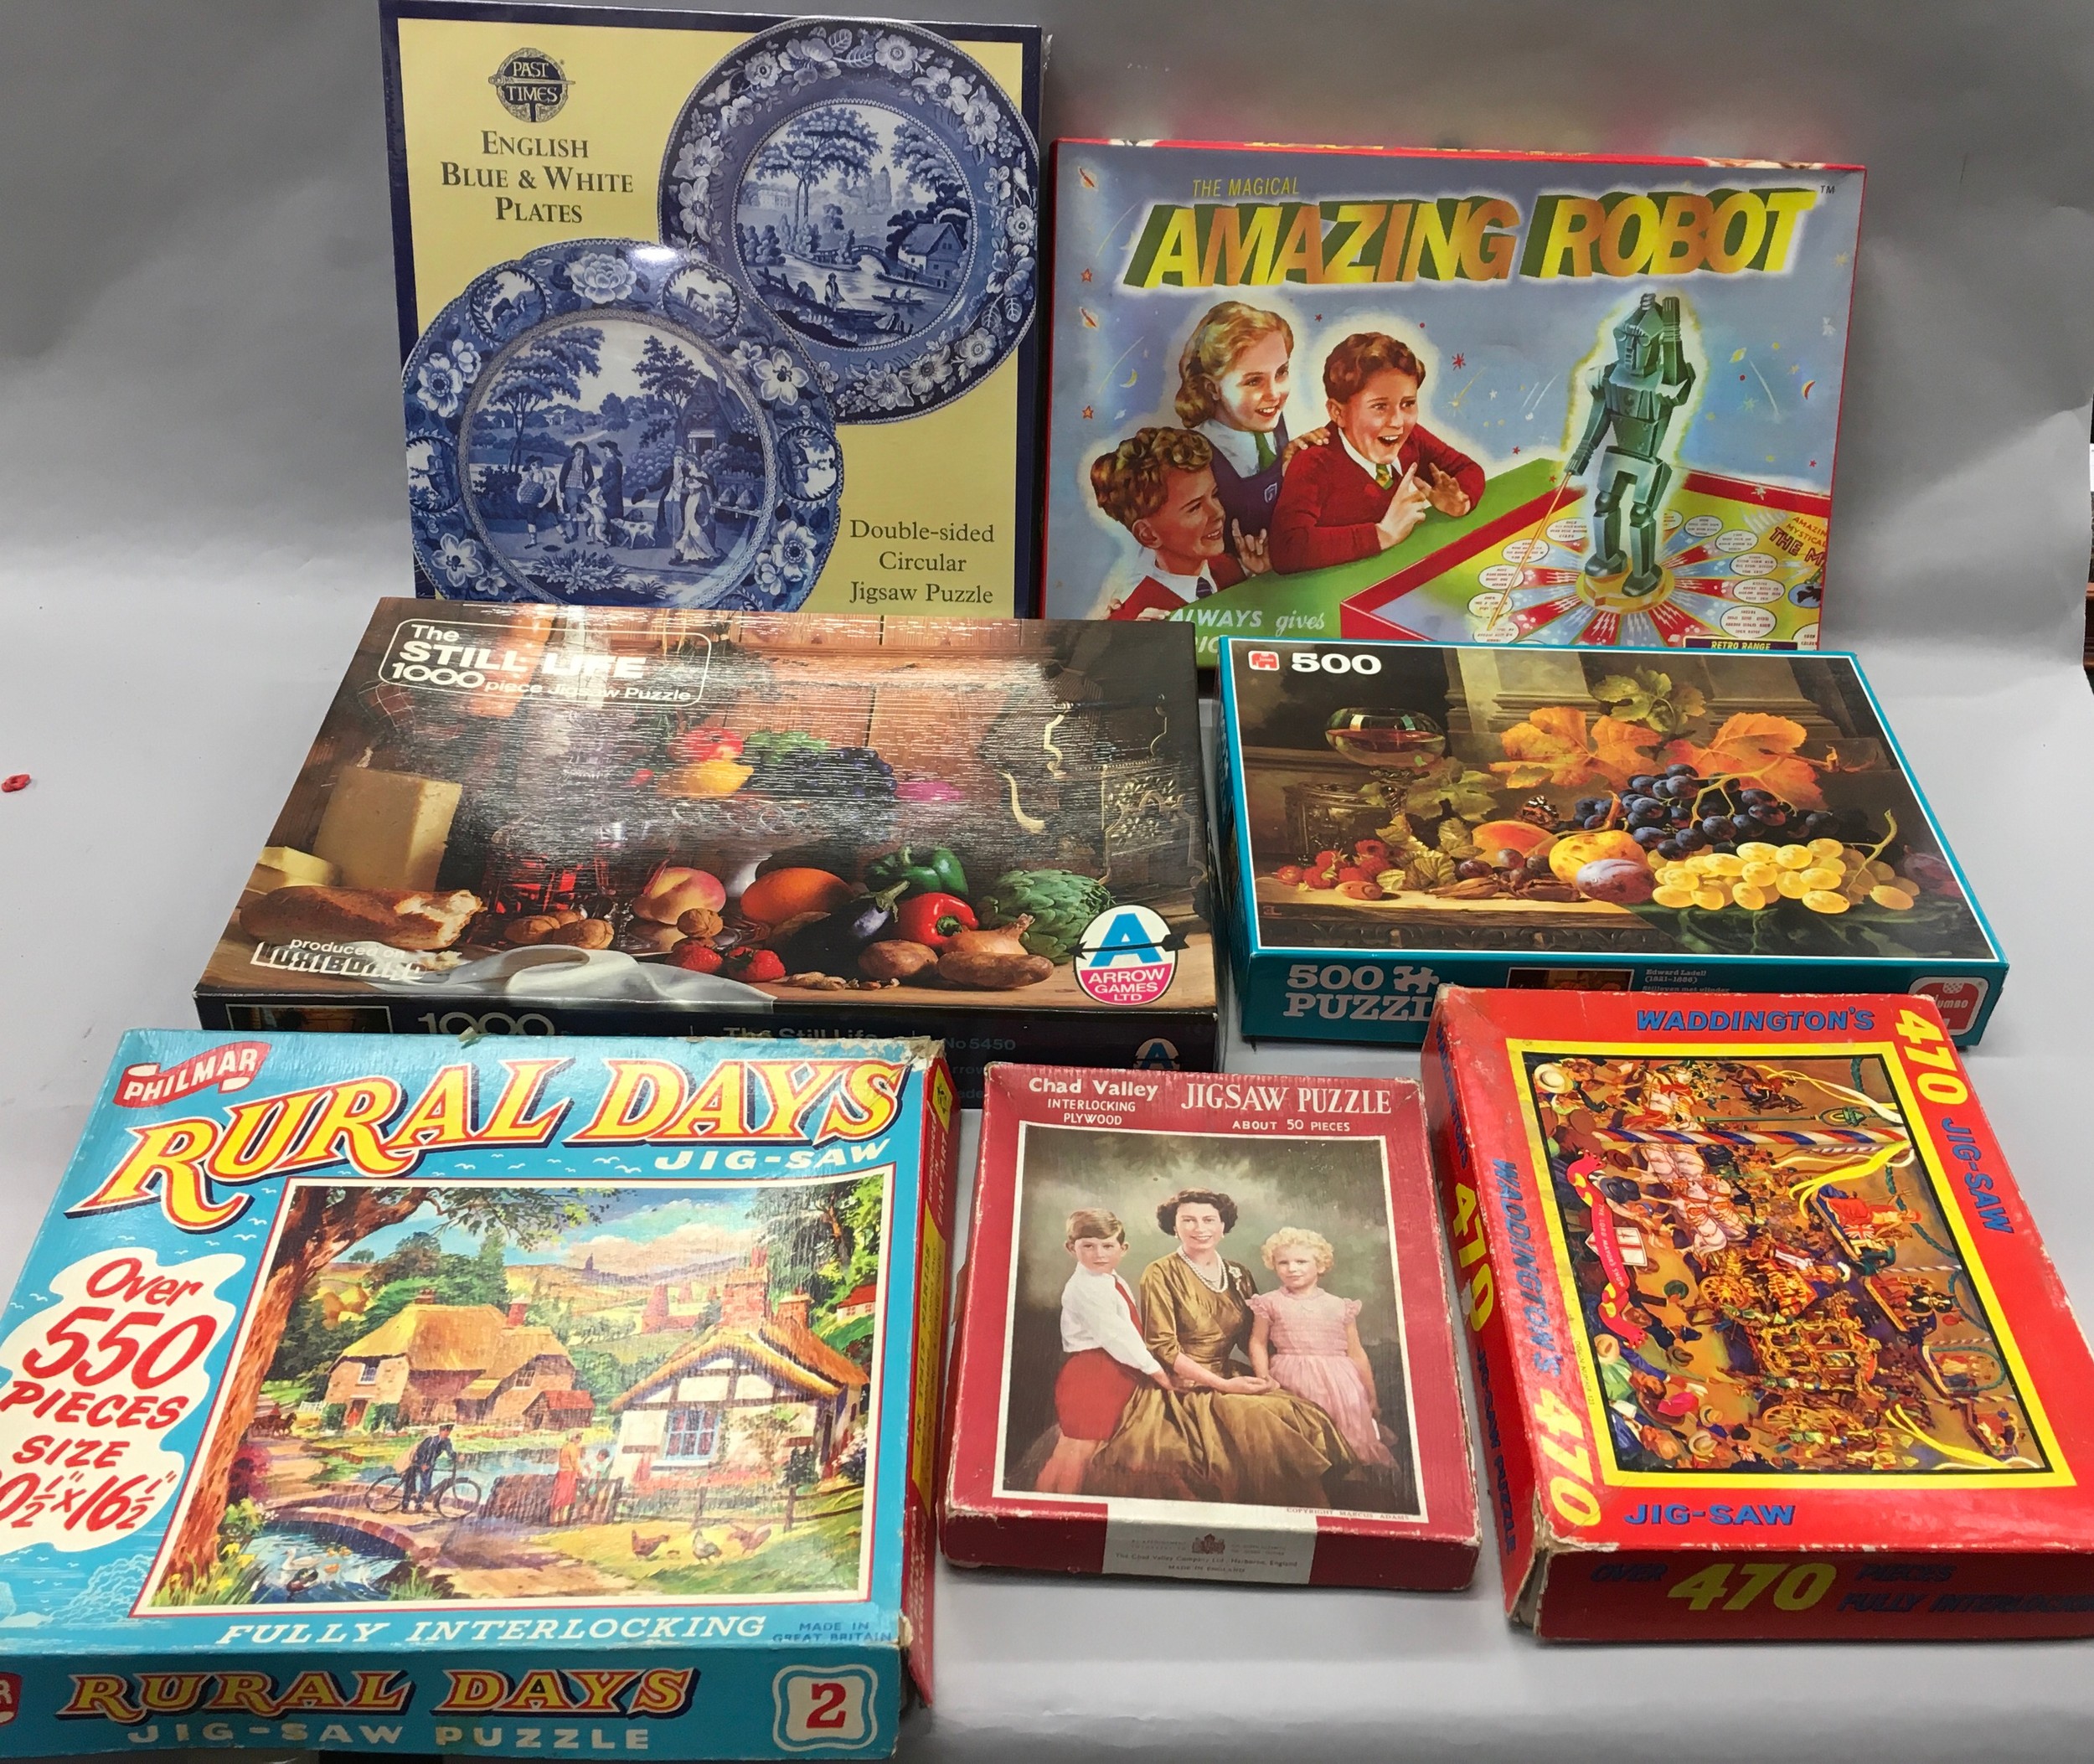 Collection of vintage jigsaw puzzles complete with boxed amazing robot game.